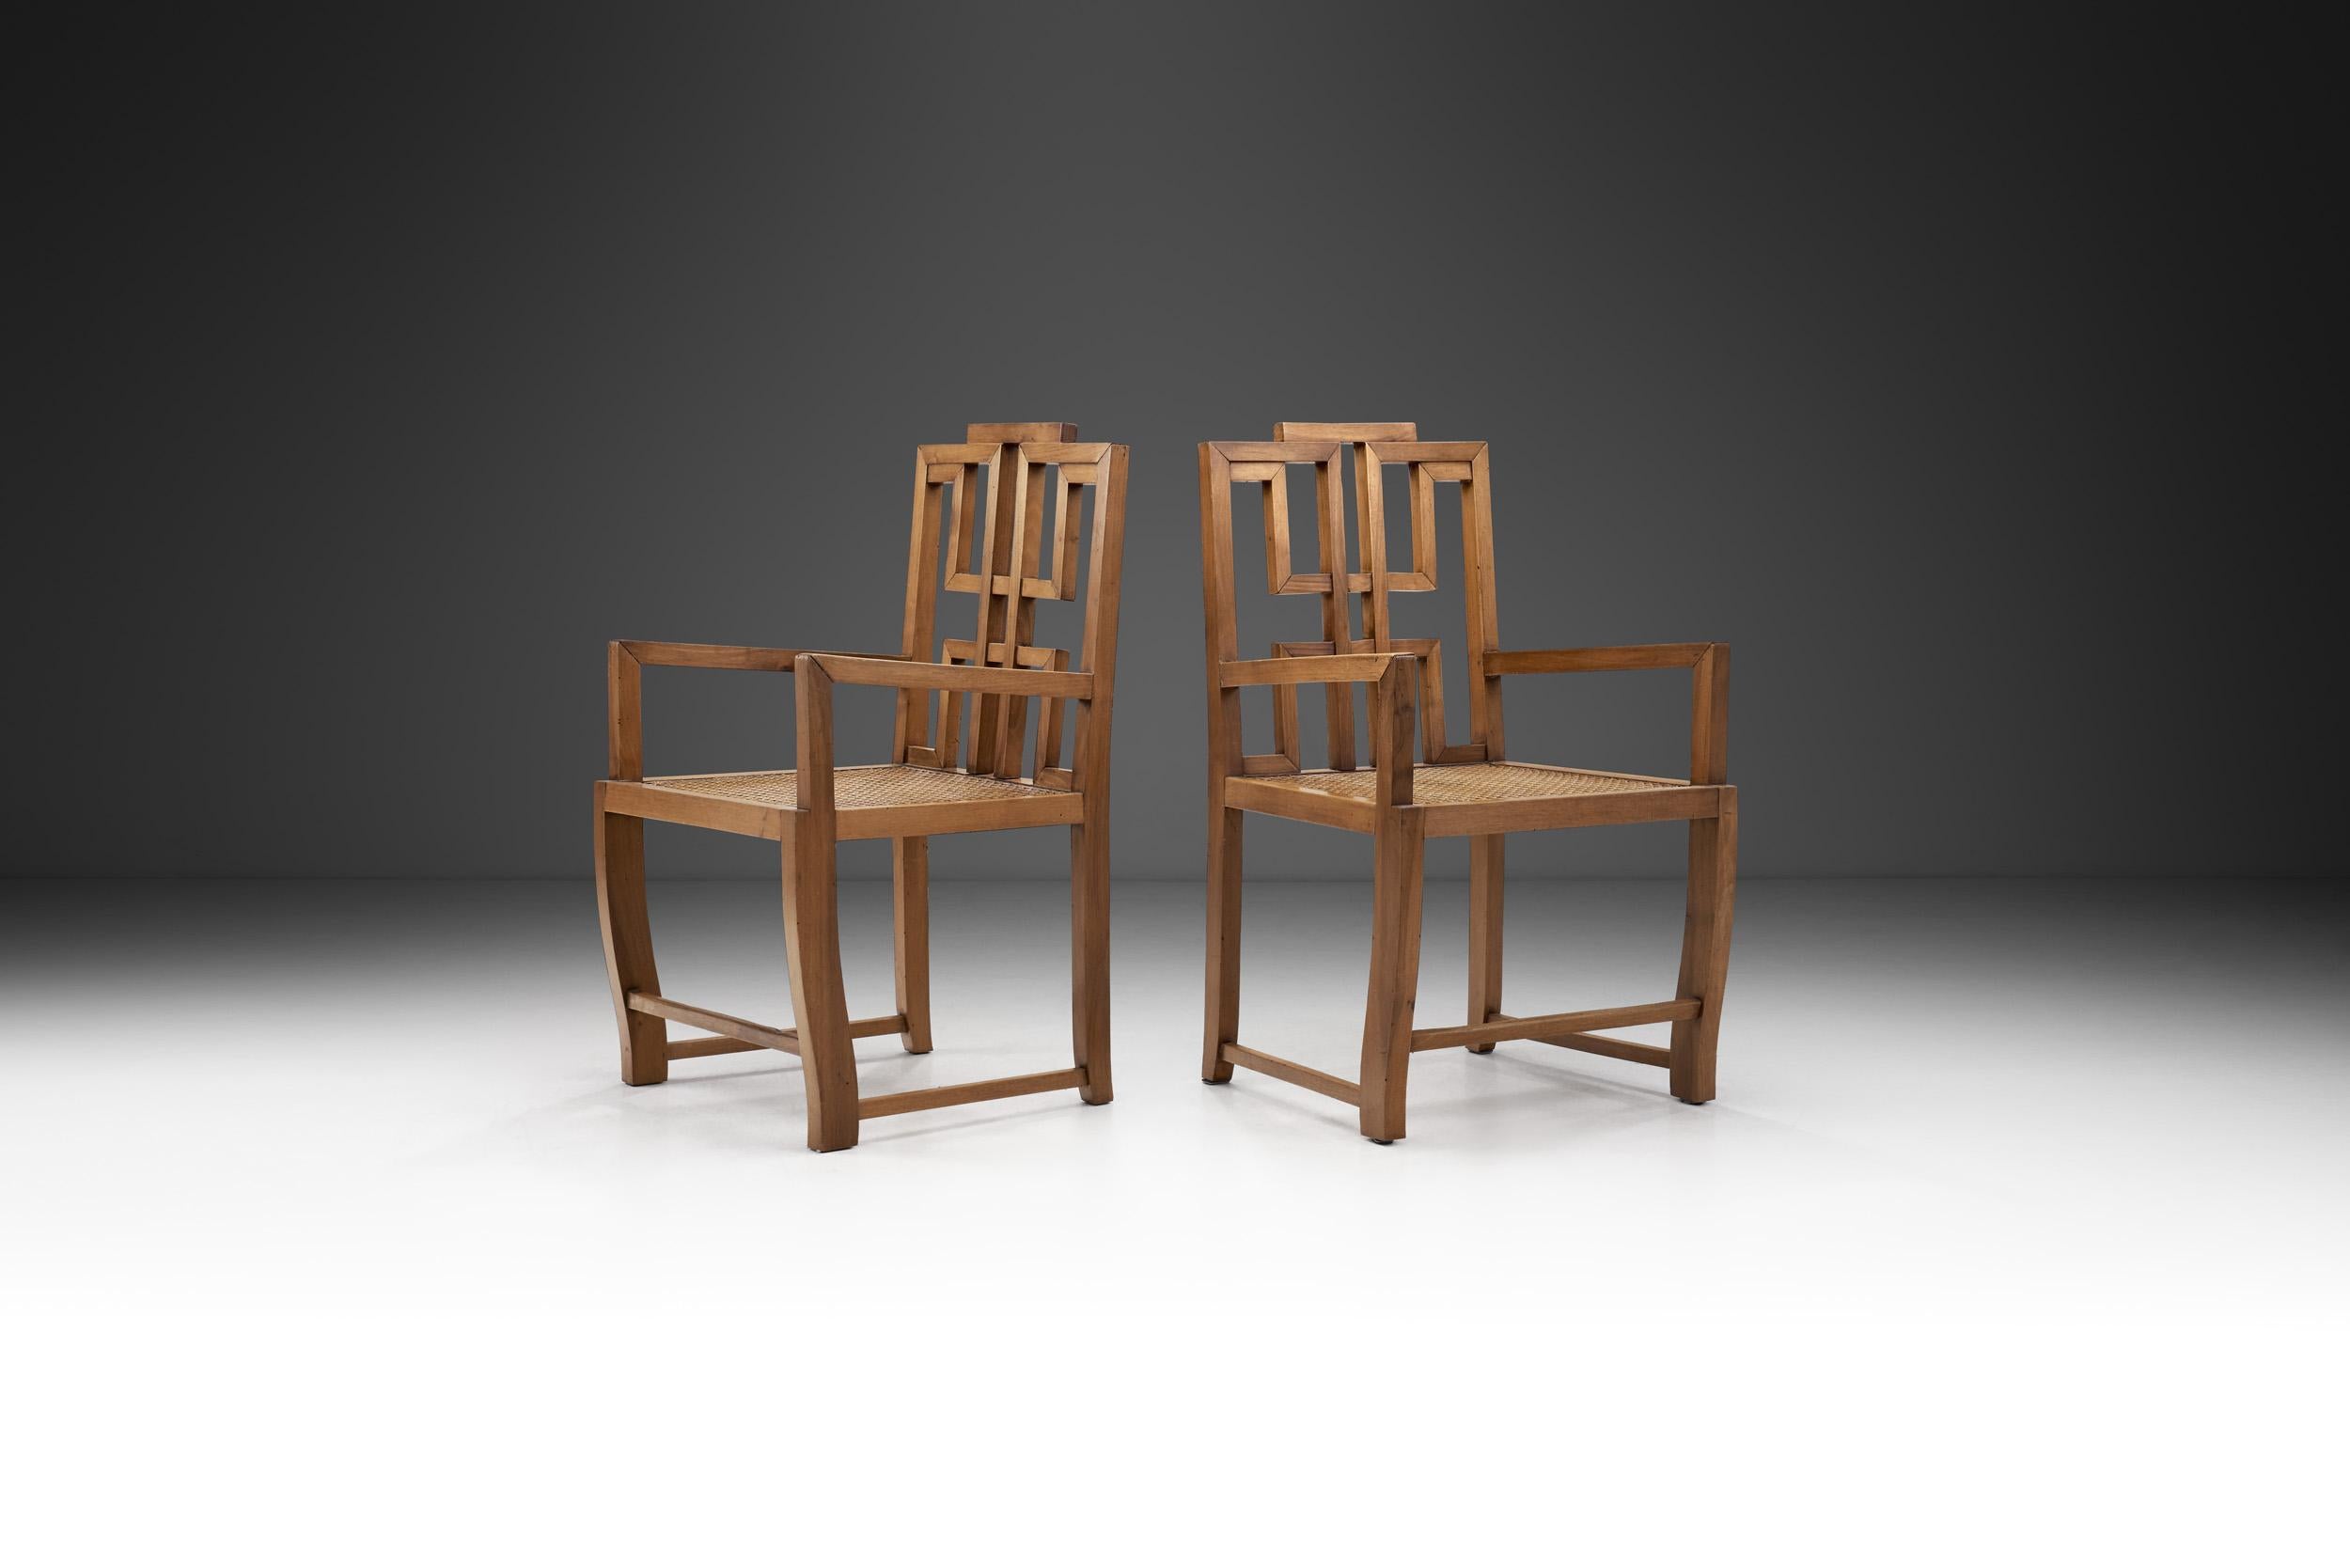 European Late 20th Century Anglo-Chinese Chairs with Caned Seats, Europe 1980s For Sale